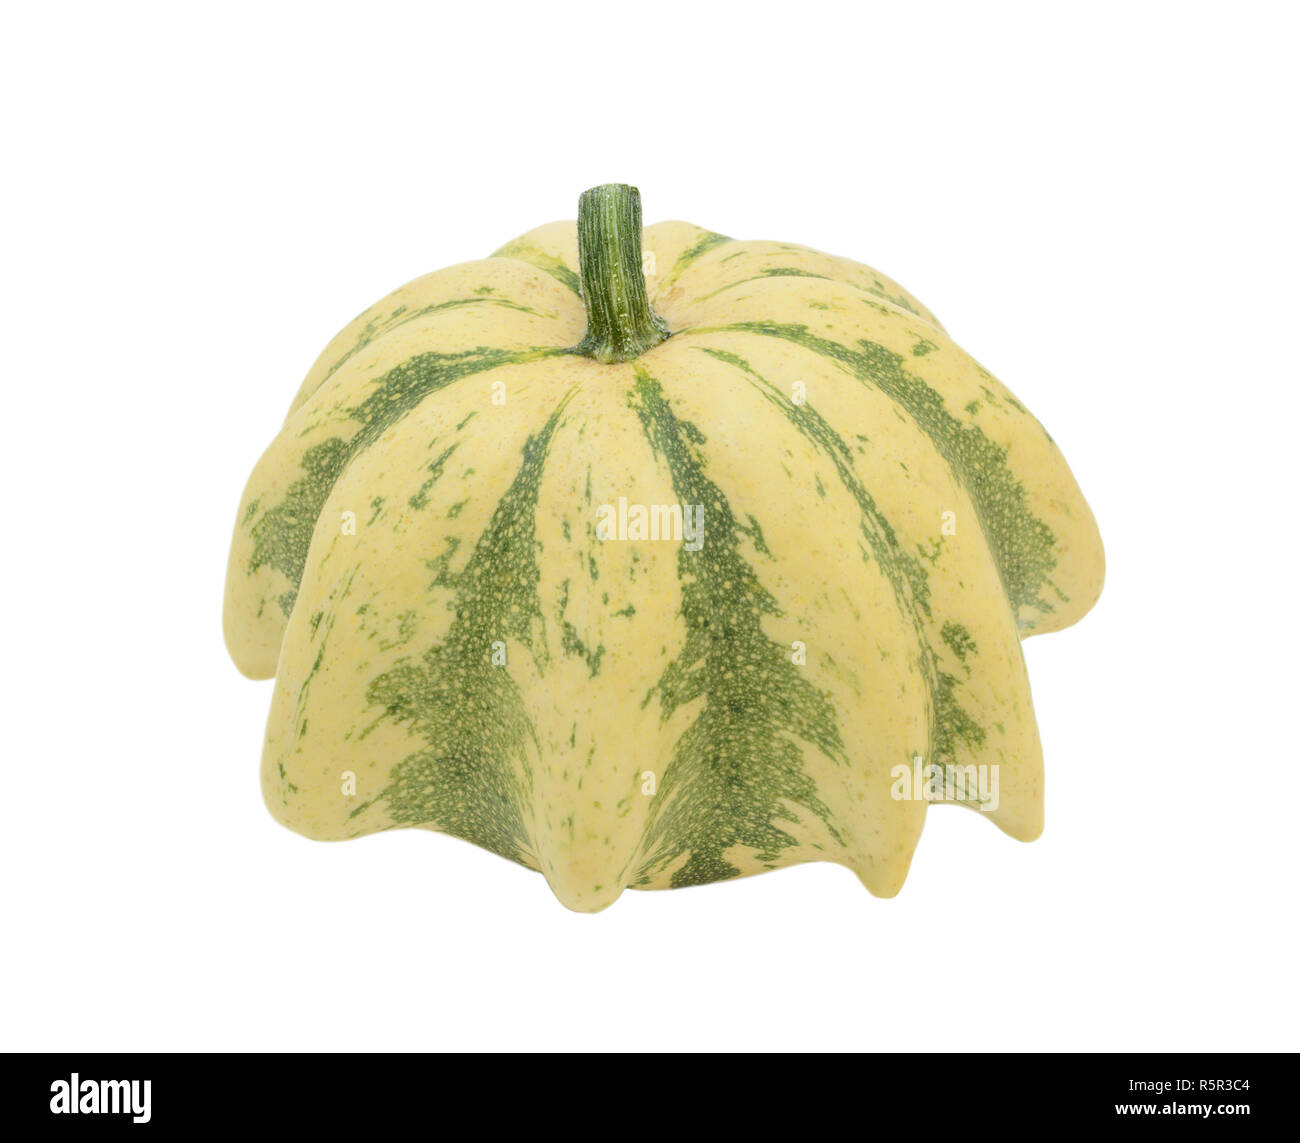 Crown of Thorns ornamental gourd with green stripes Stock Photo